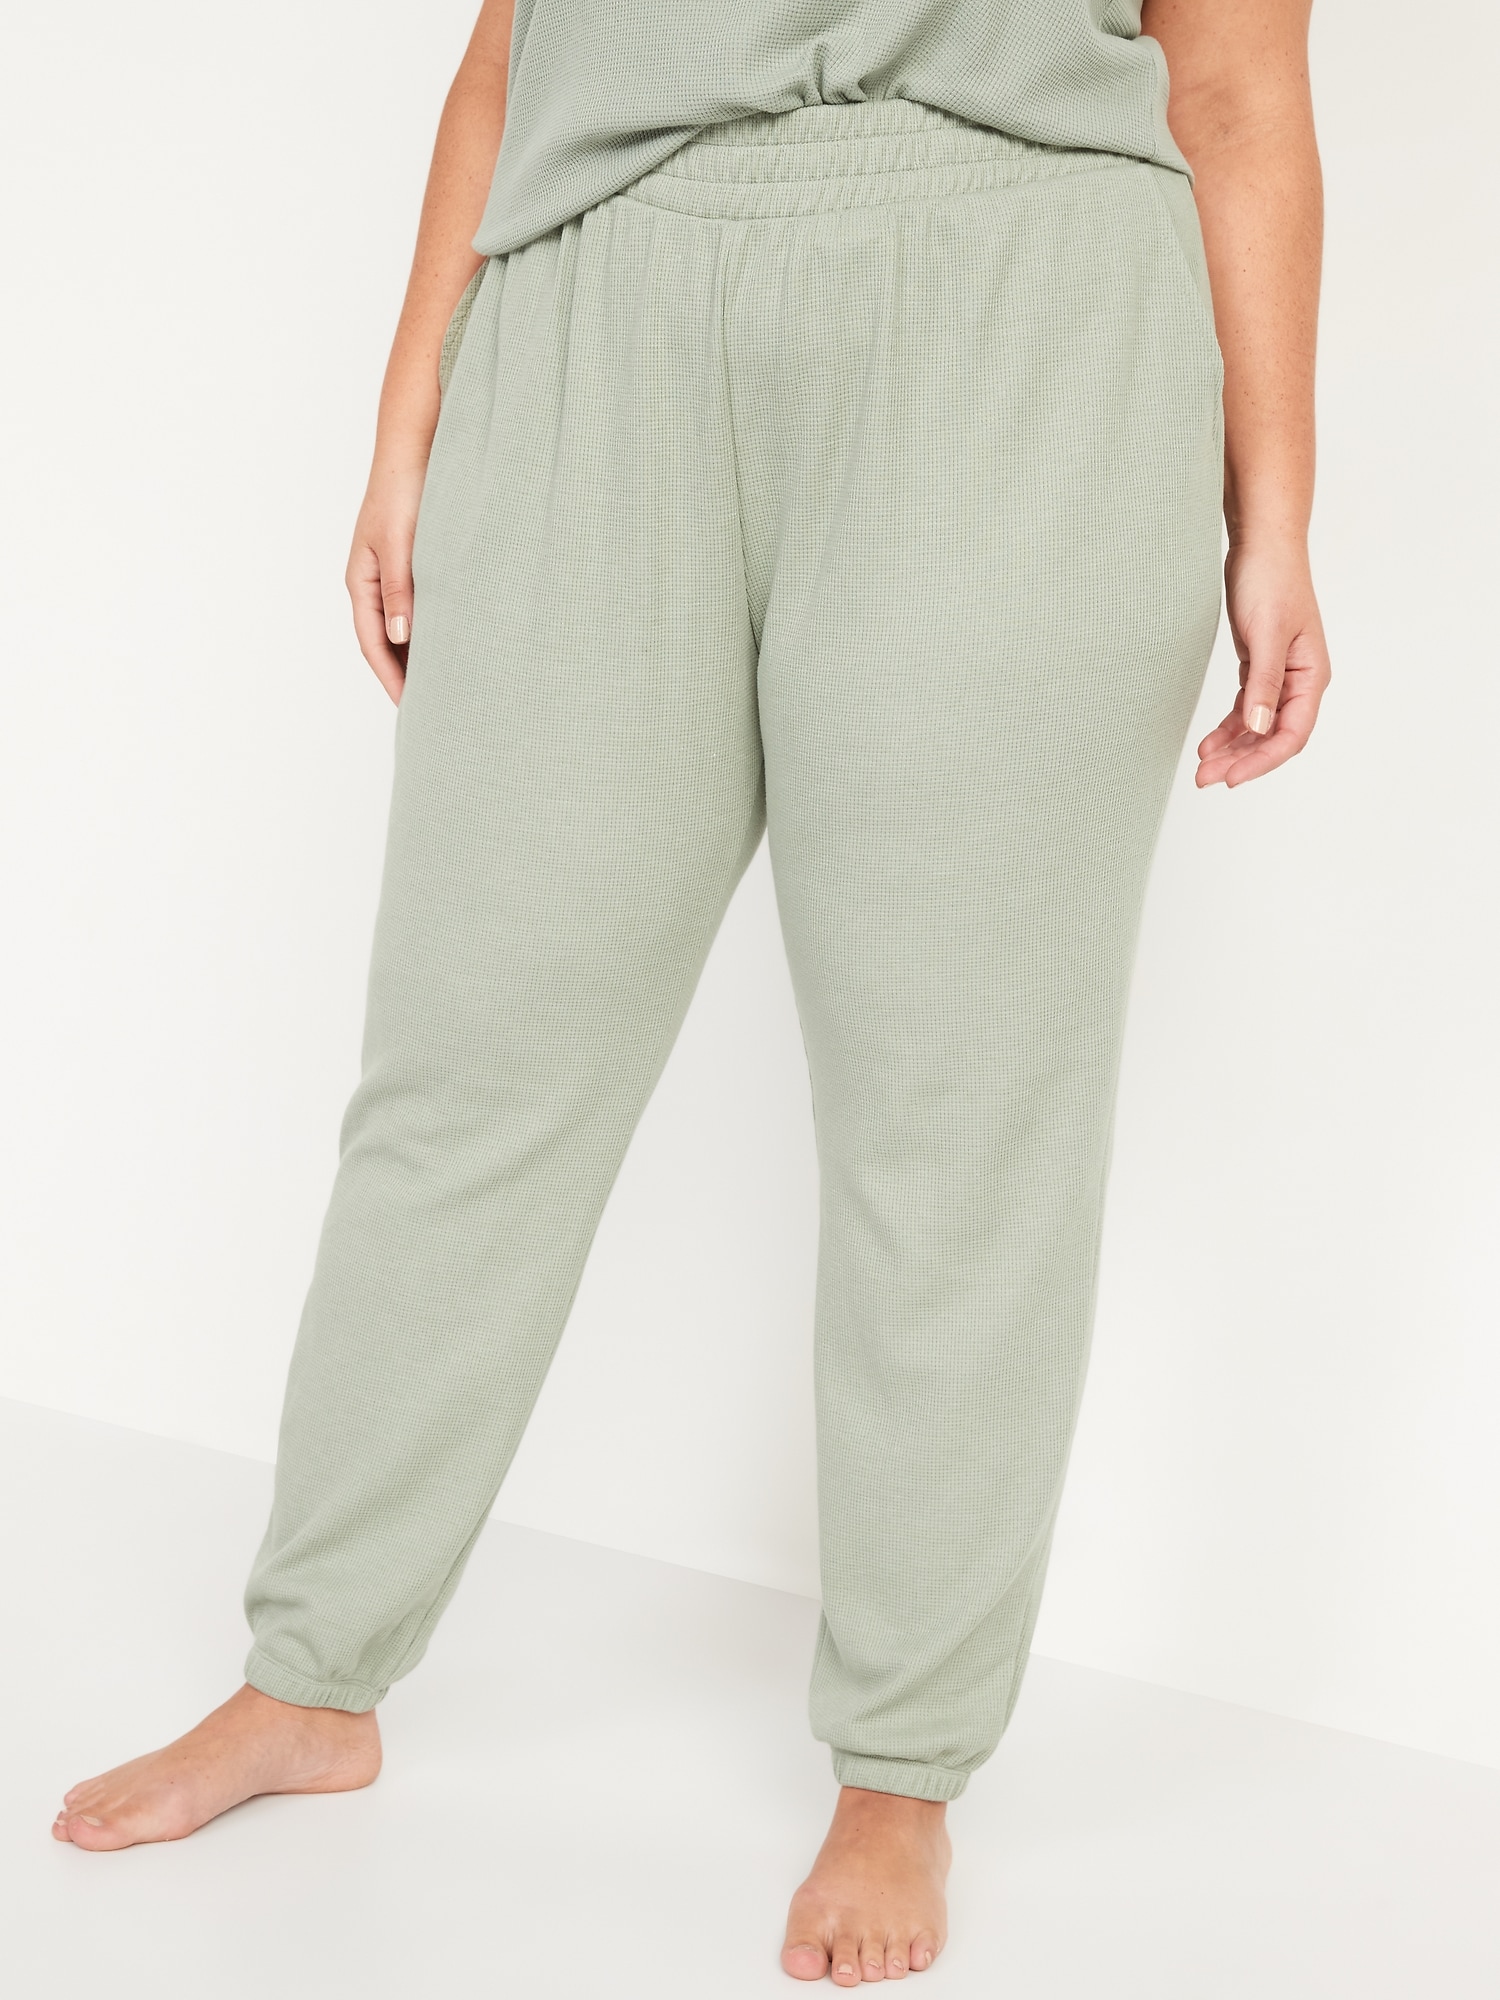 High-Waisted Thermal Jogger Lounge Pants for Women